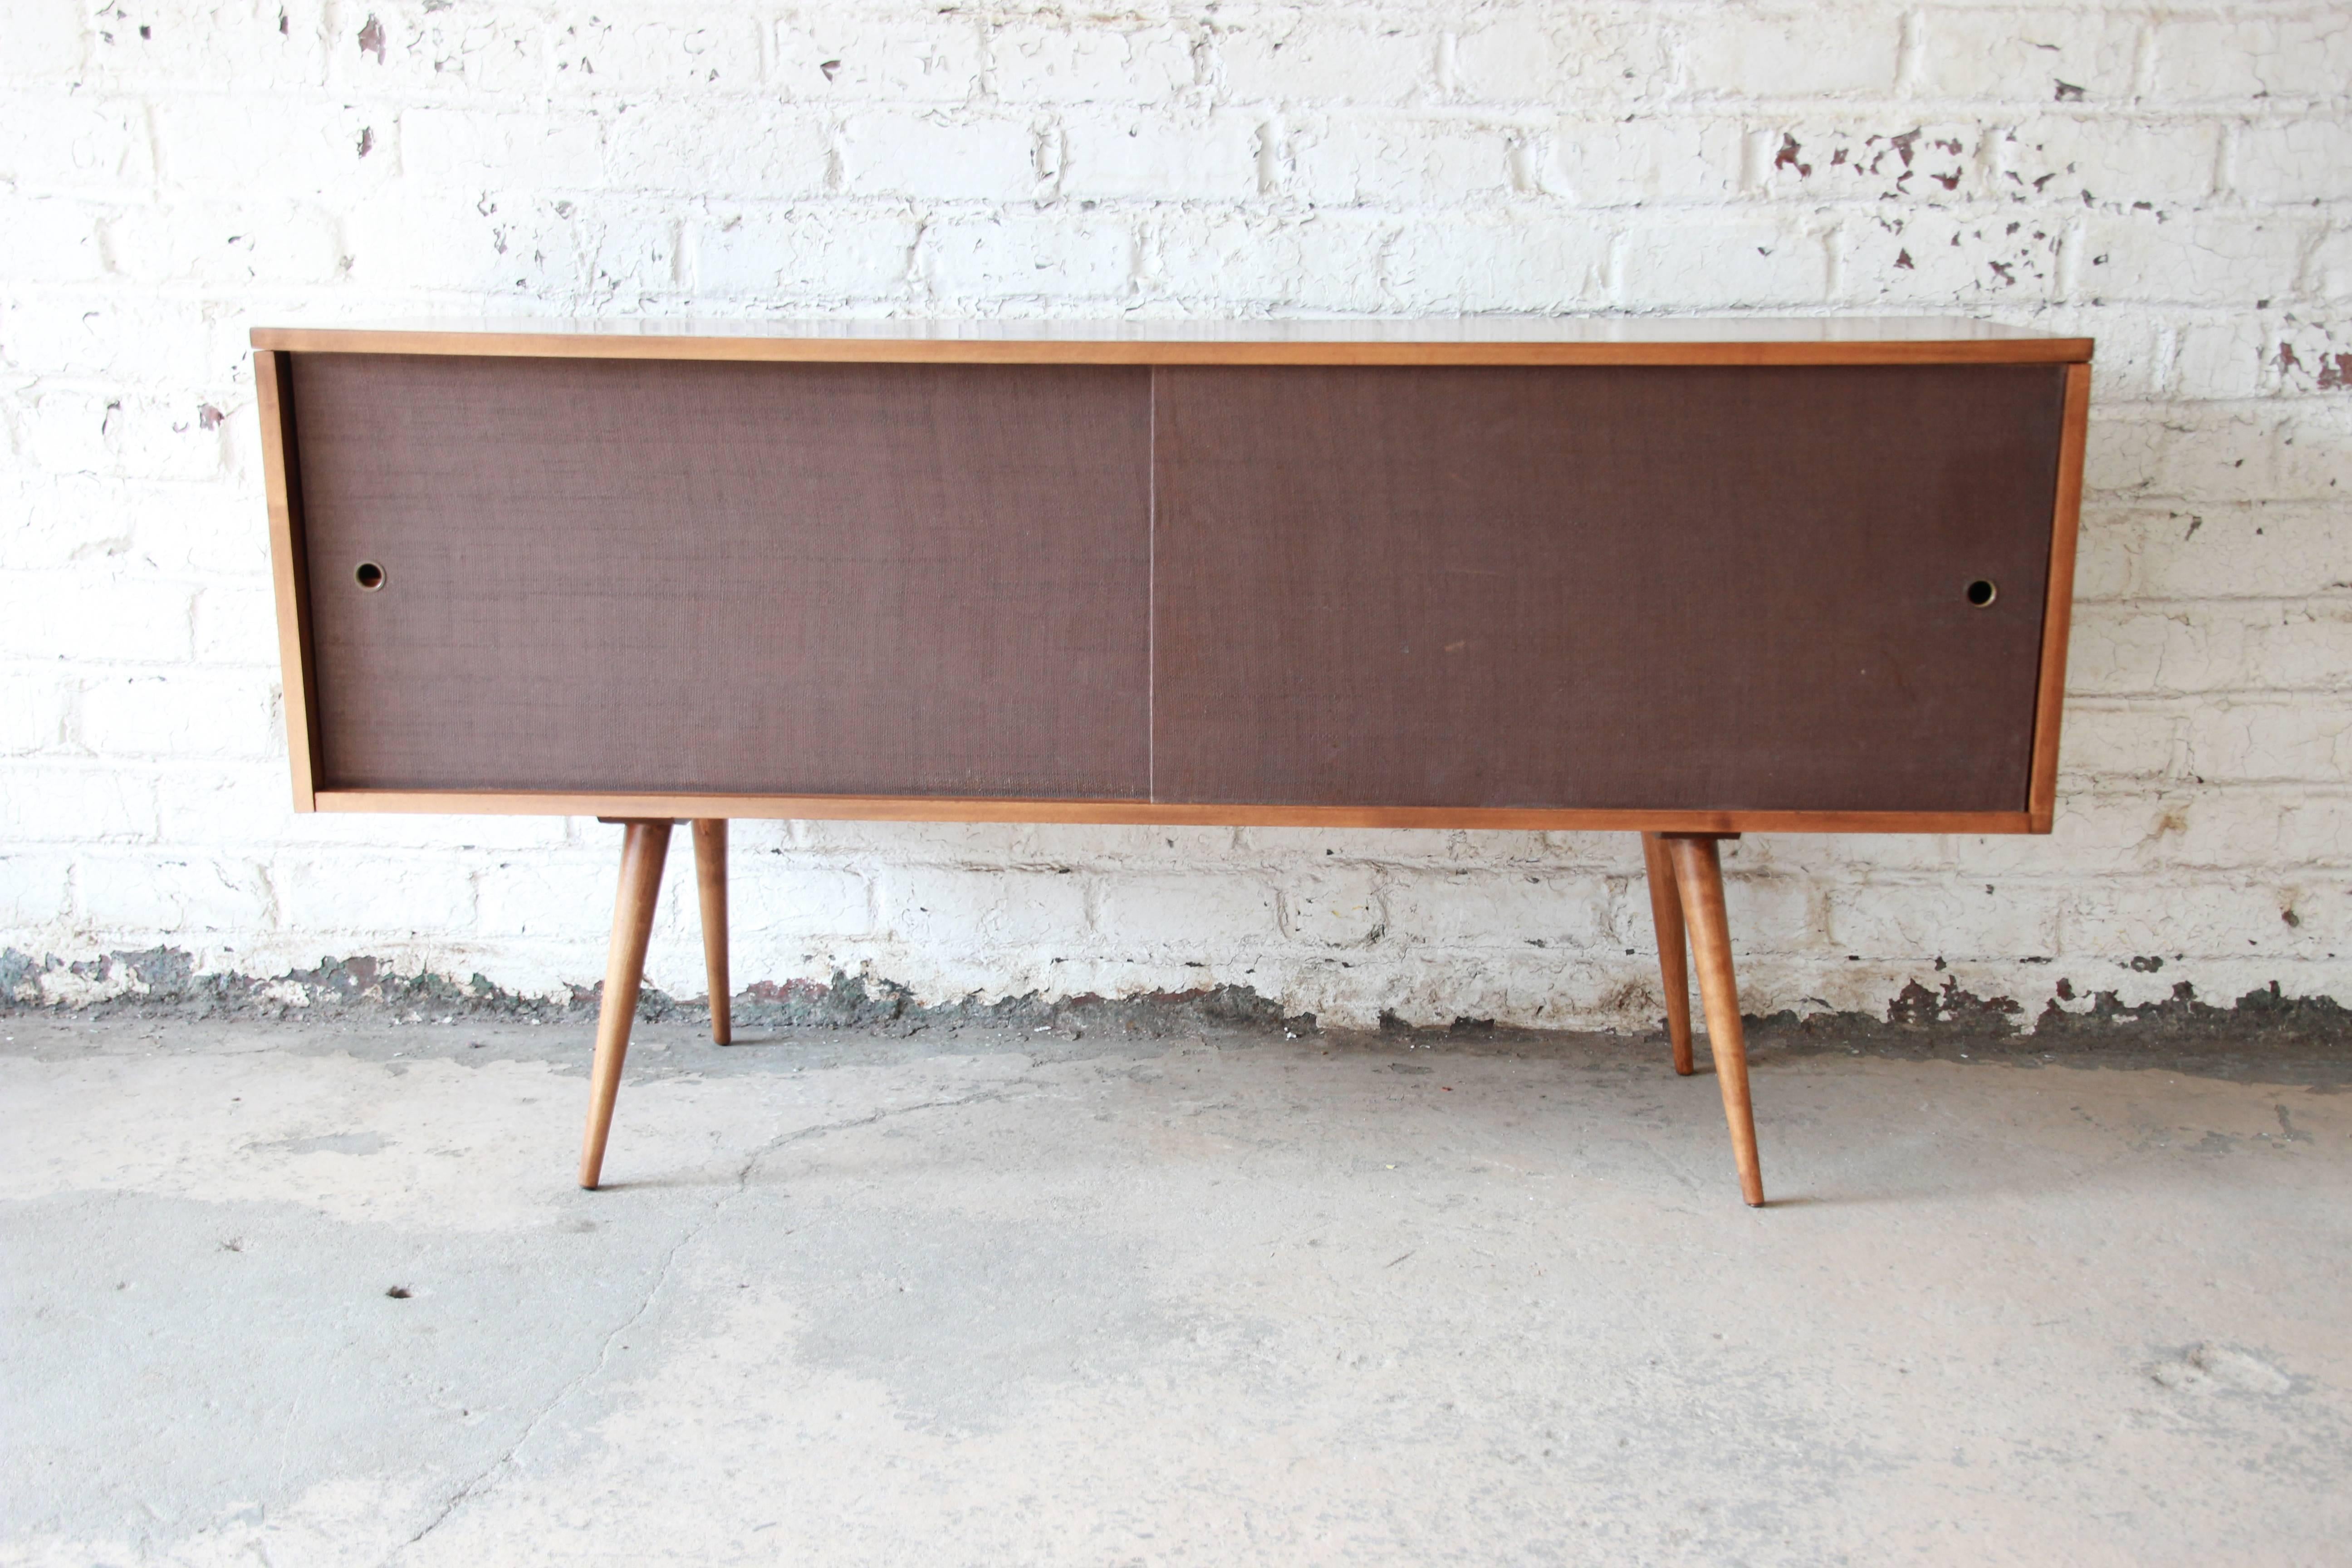 Offering an exceptional Mid-Century Modern credenza or record cabinet designed by Paul McCobb for his 